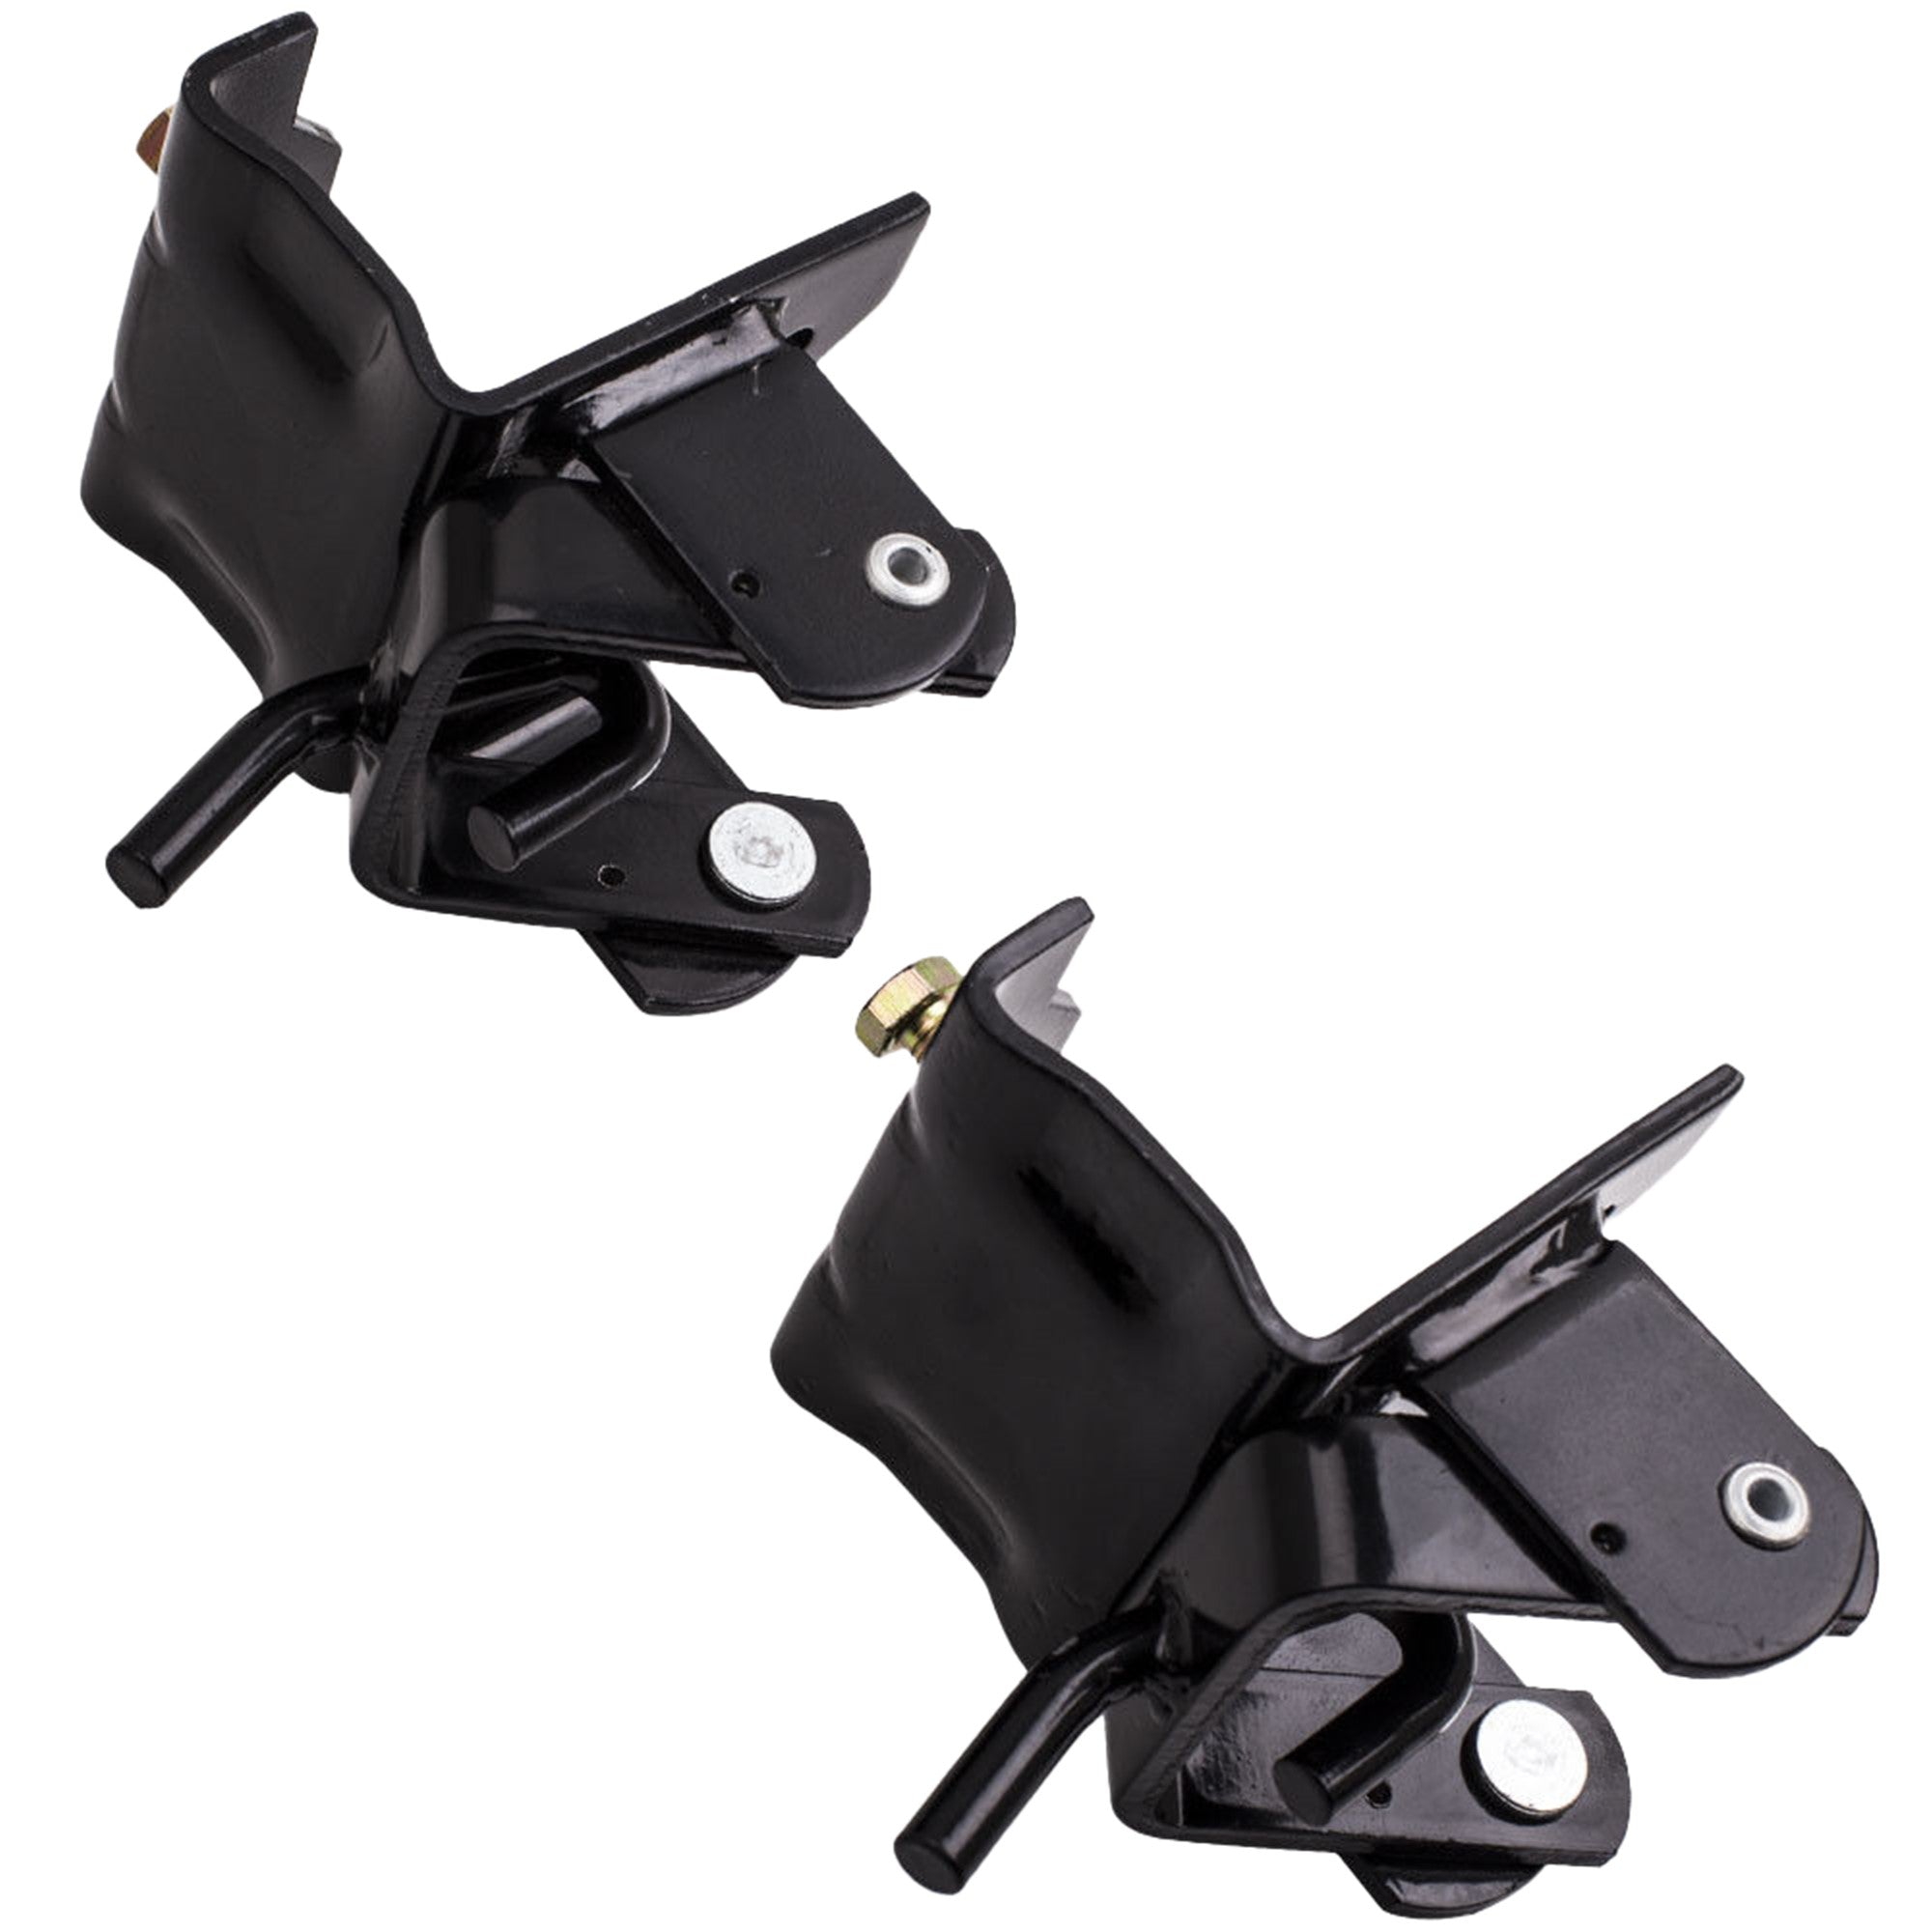 For long-lasting resilience to the elements, this weight distribution hitch is covered in a durable carbide black powder coat finish